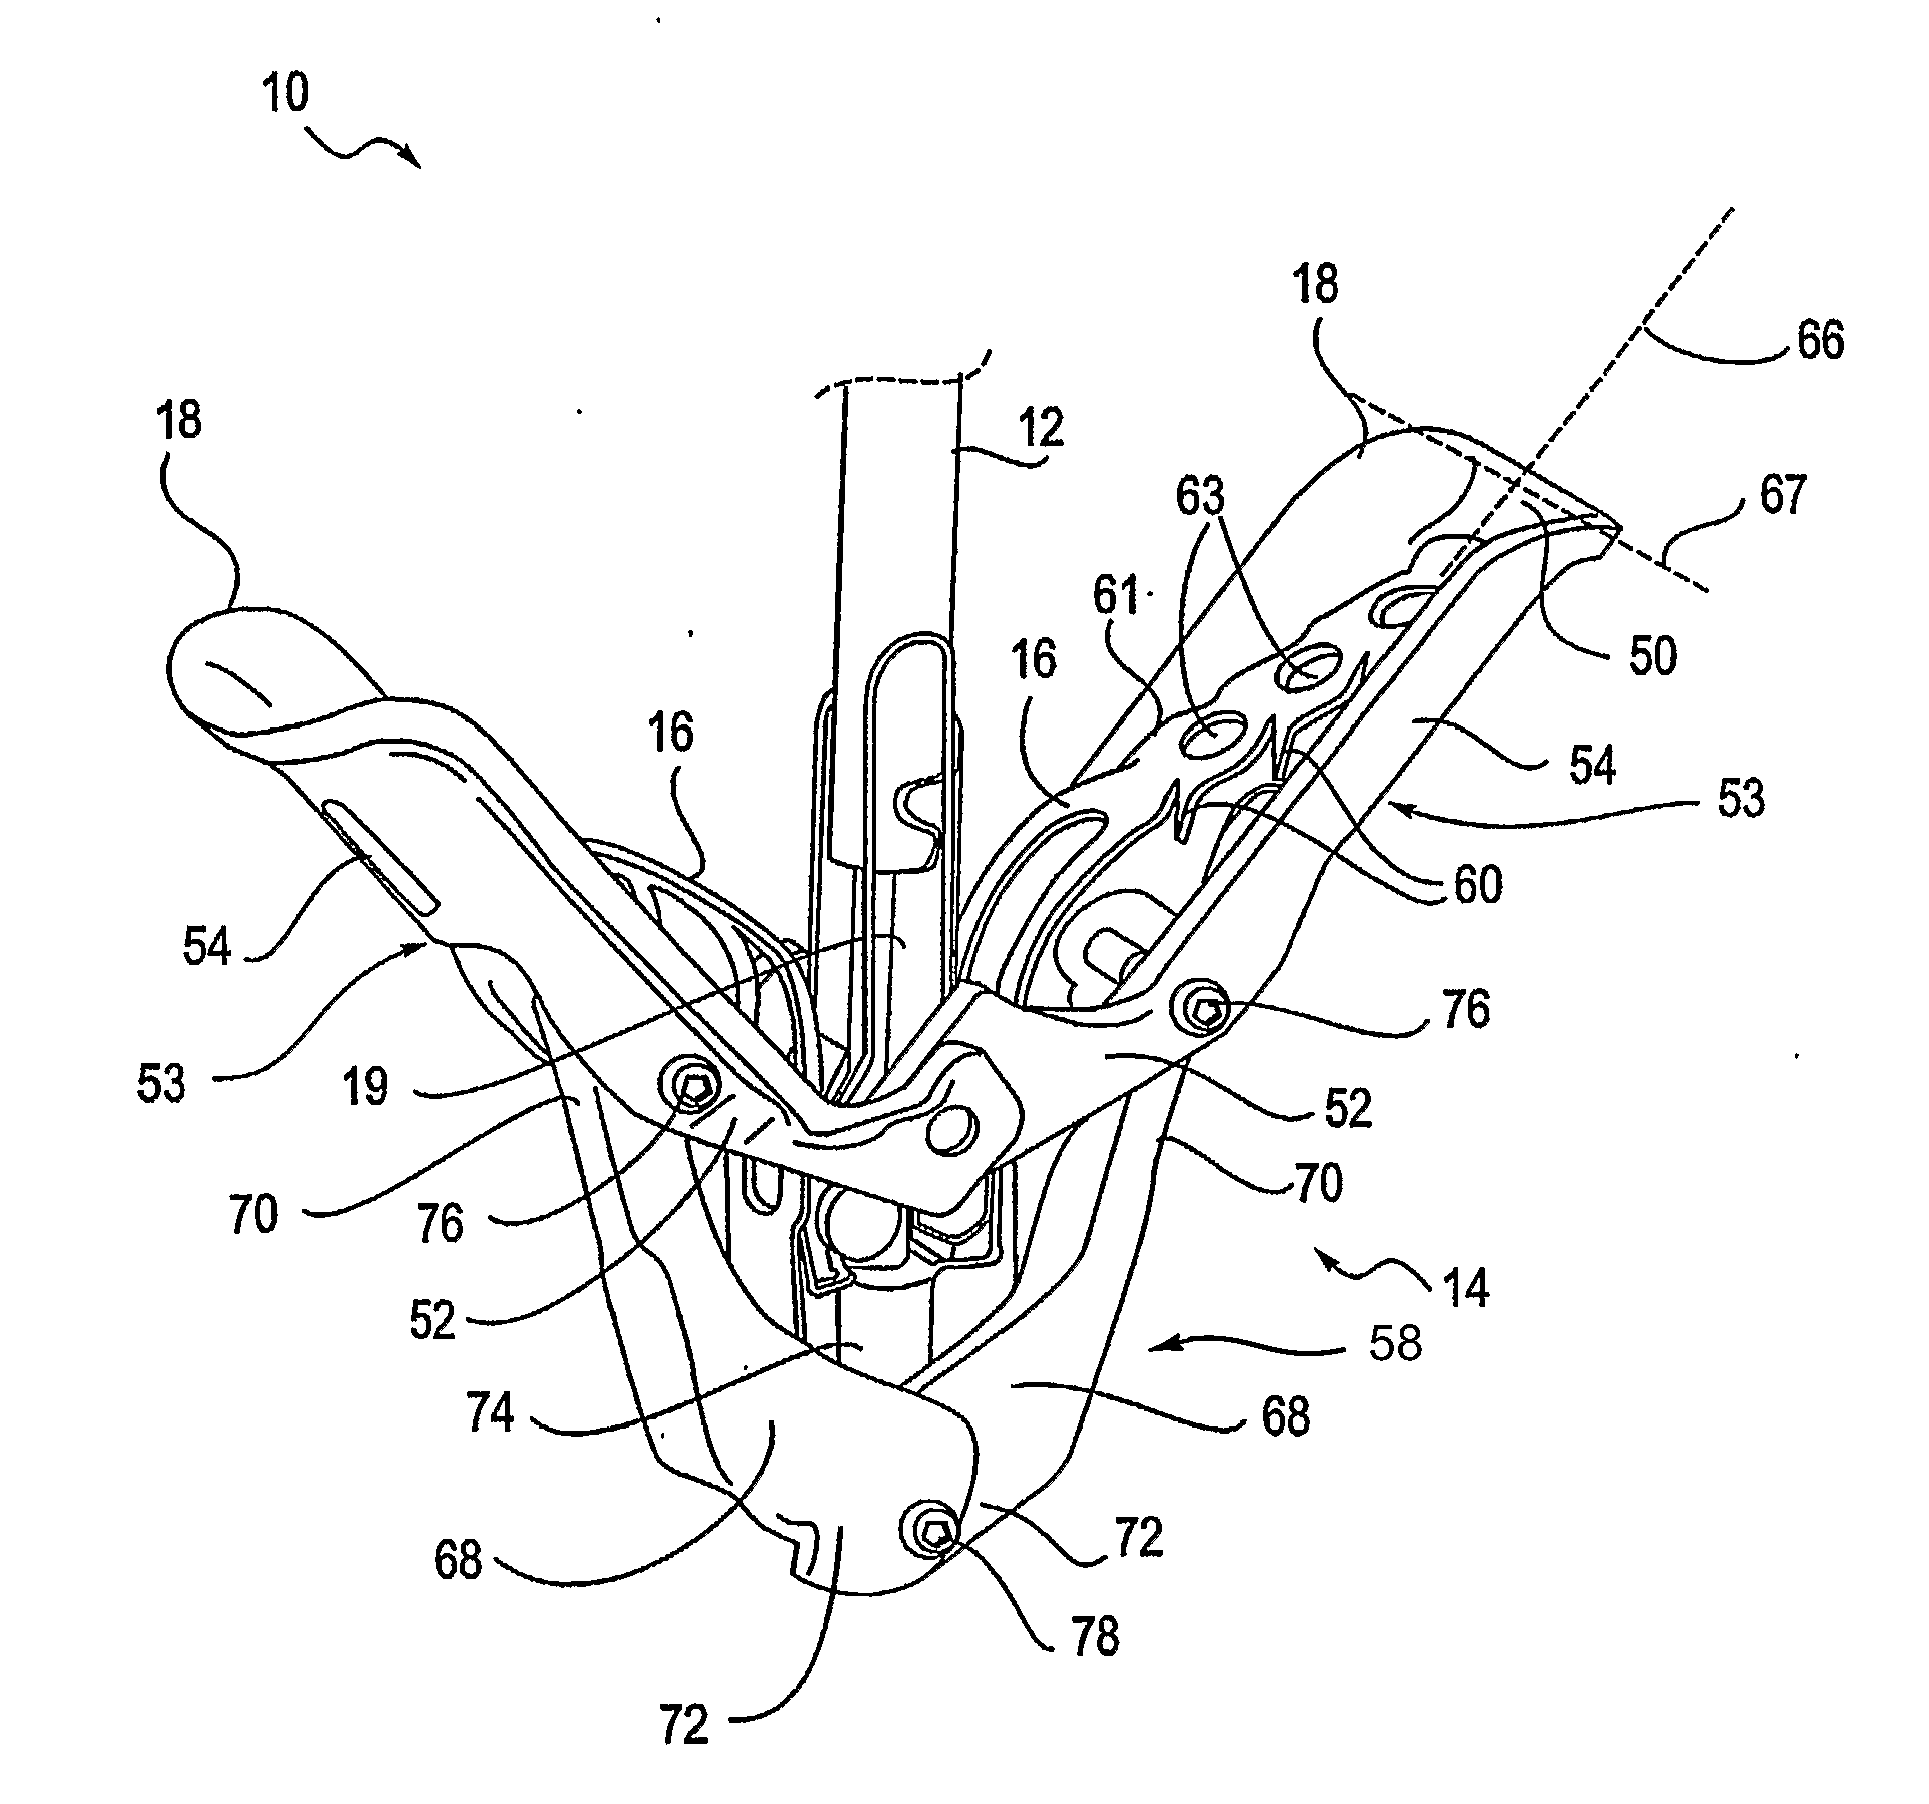 Mitral valve fixation device removal devices and methods